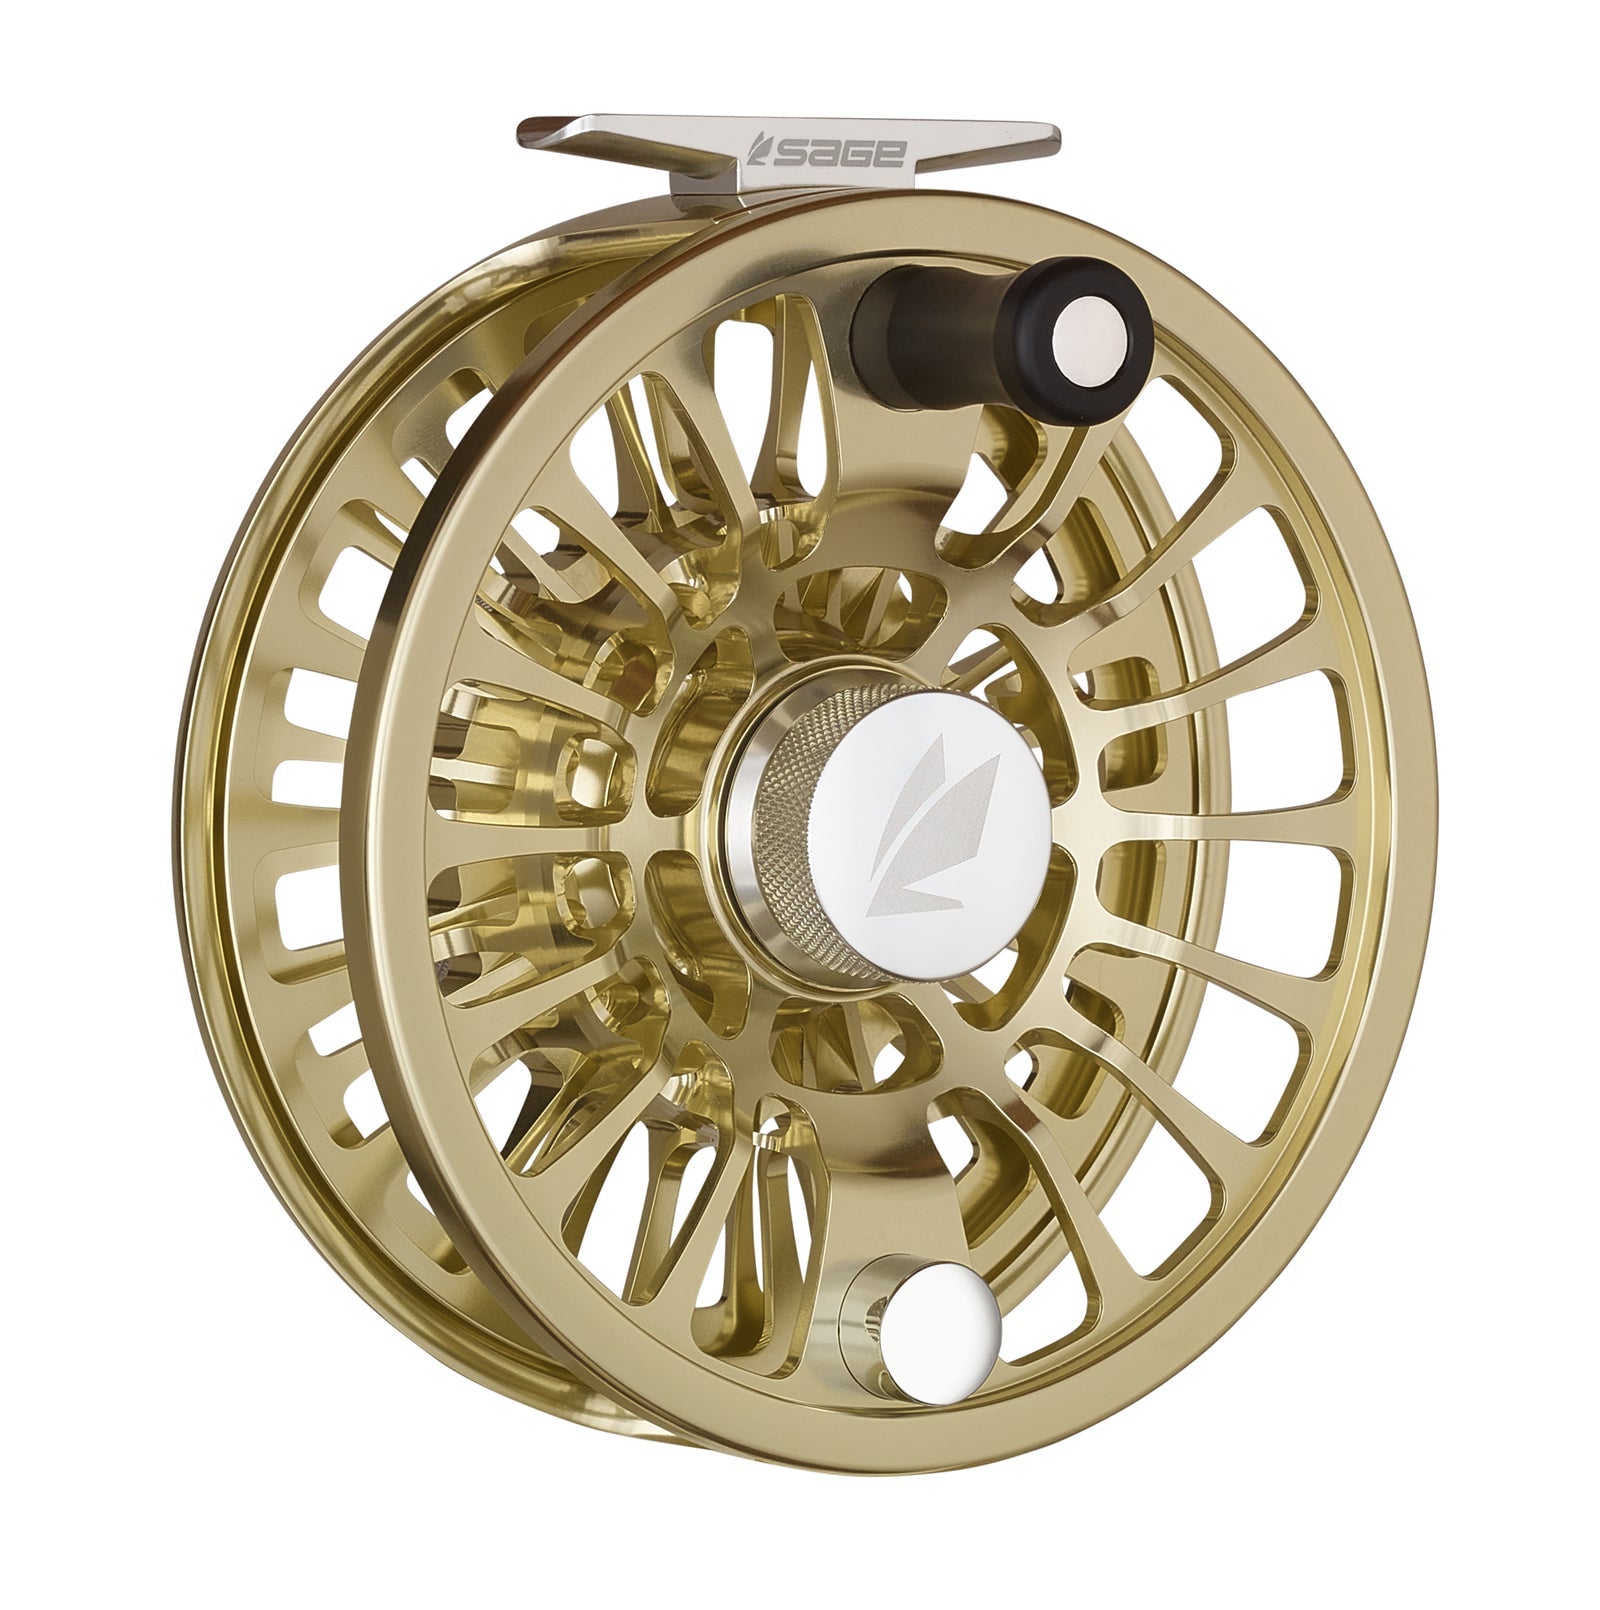 SAGE THERMO Fly Reel 12-16 WT for Offshore/Bluewater - Champagne - NEW